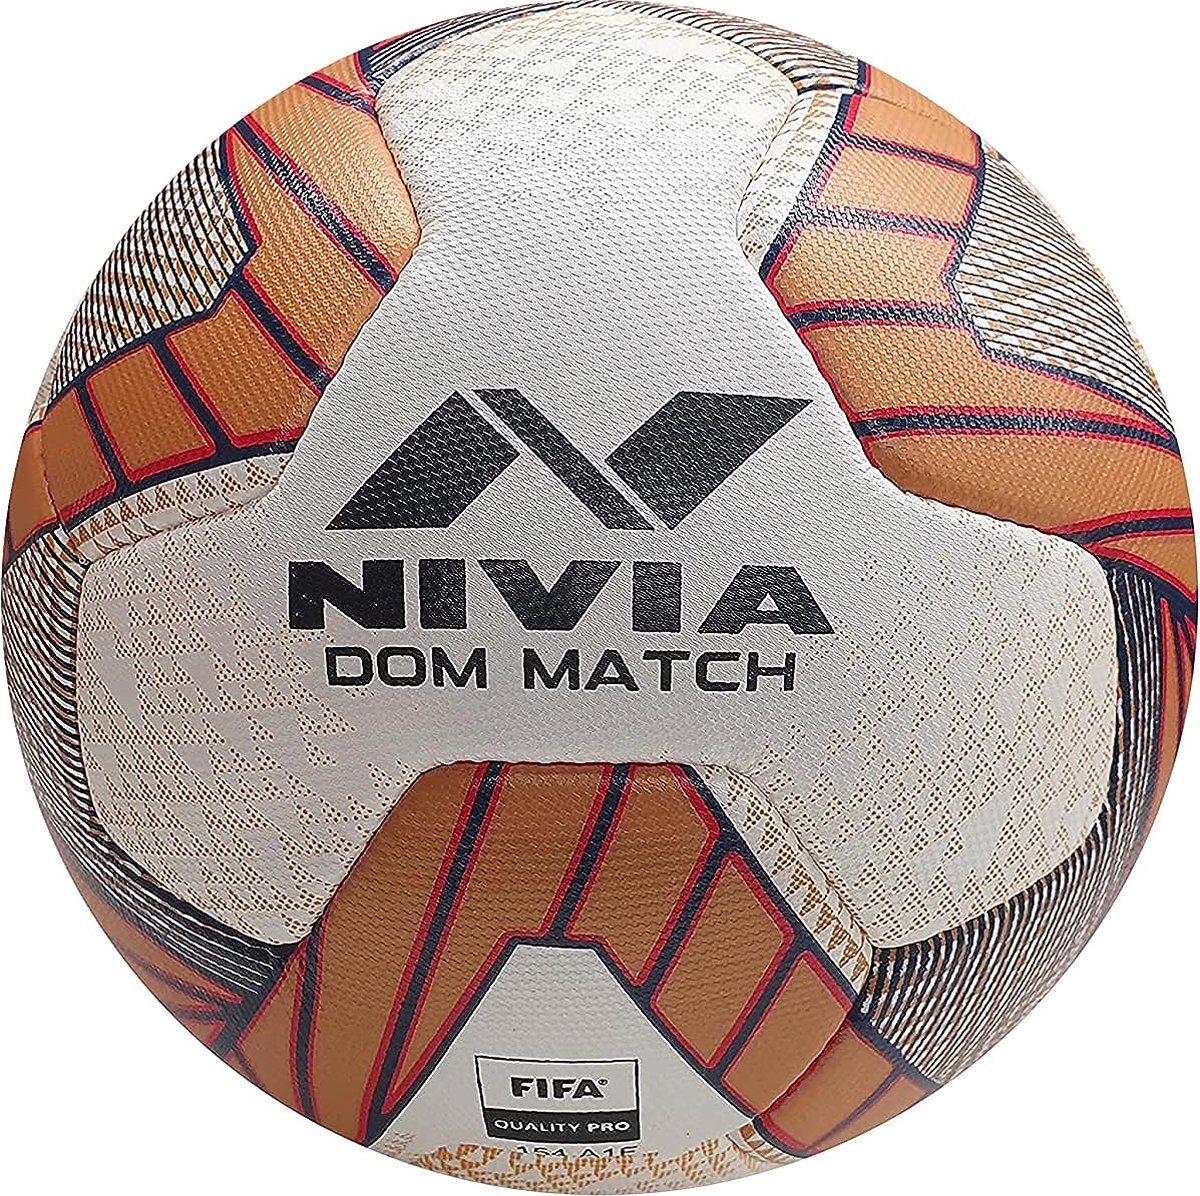 Nivia DOM FIFA Quality Pro Football (Golden, Size-5) | Material: PU | Soccer Match Ball for Professionals | All Surface | Machine Stitched | Ideal for Match